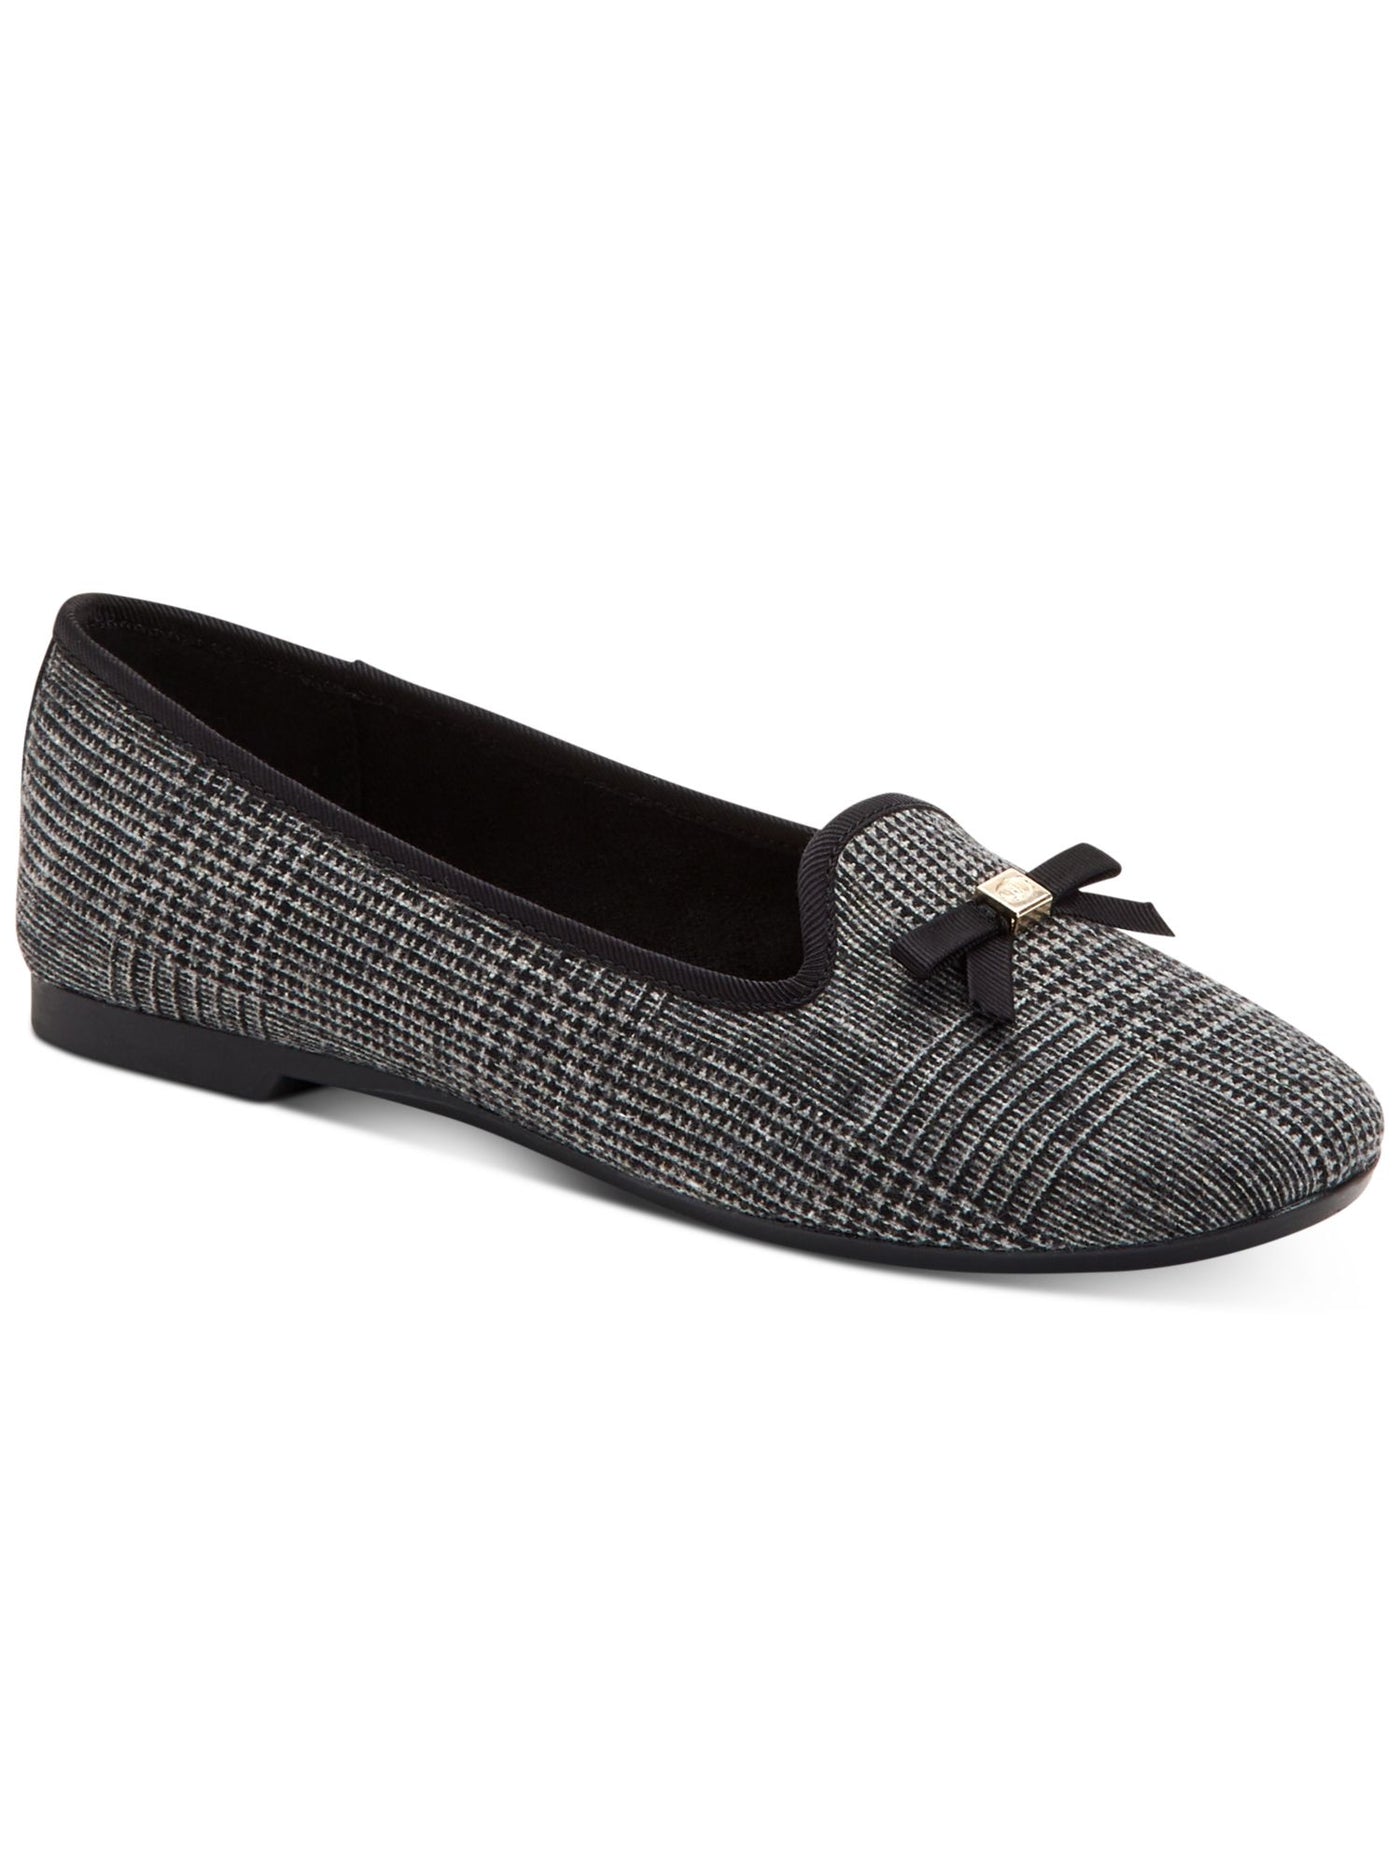 CHARTER CLUB Womens Gray Patterned Metallic Accent Bow Accent Padded Kimii Round Toe Slip On Loafers Shoes 9.5 M